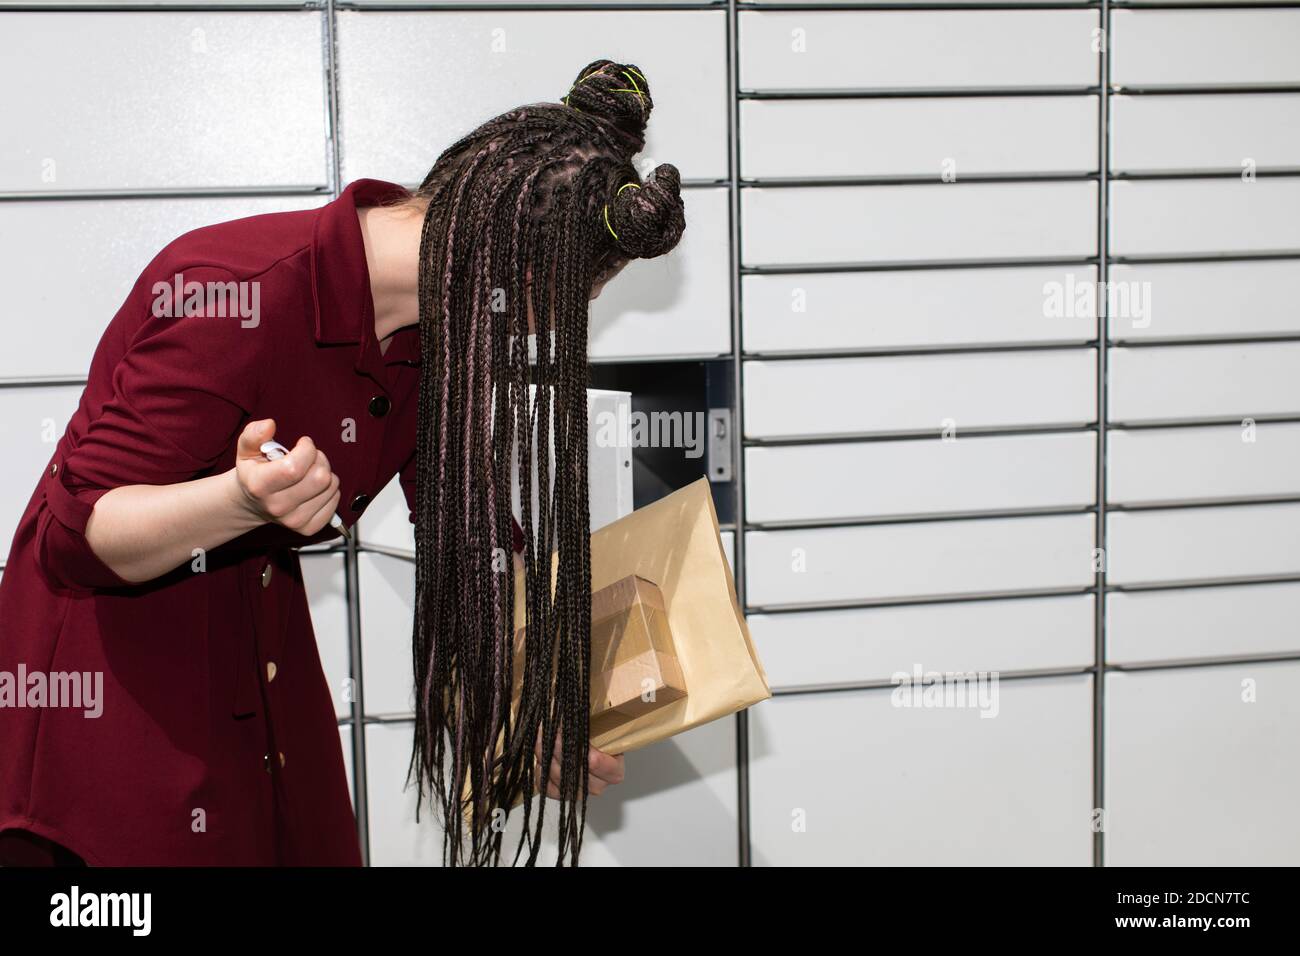 He carefully checks the opened mailbox. Young teenage girl with an interesting hairstyle. African braids. Stock Photo